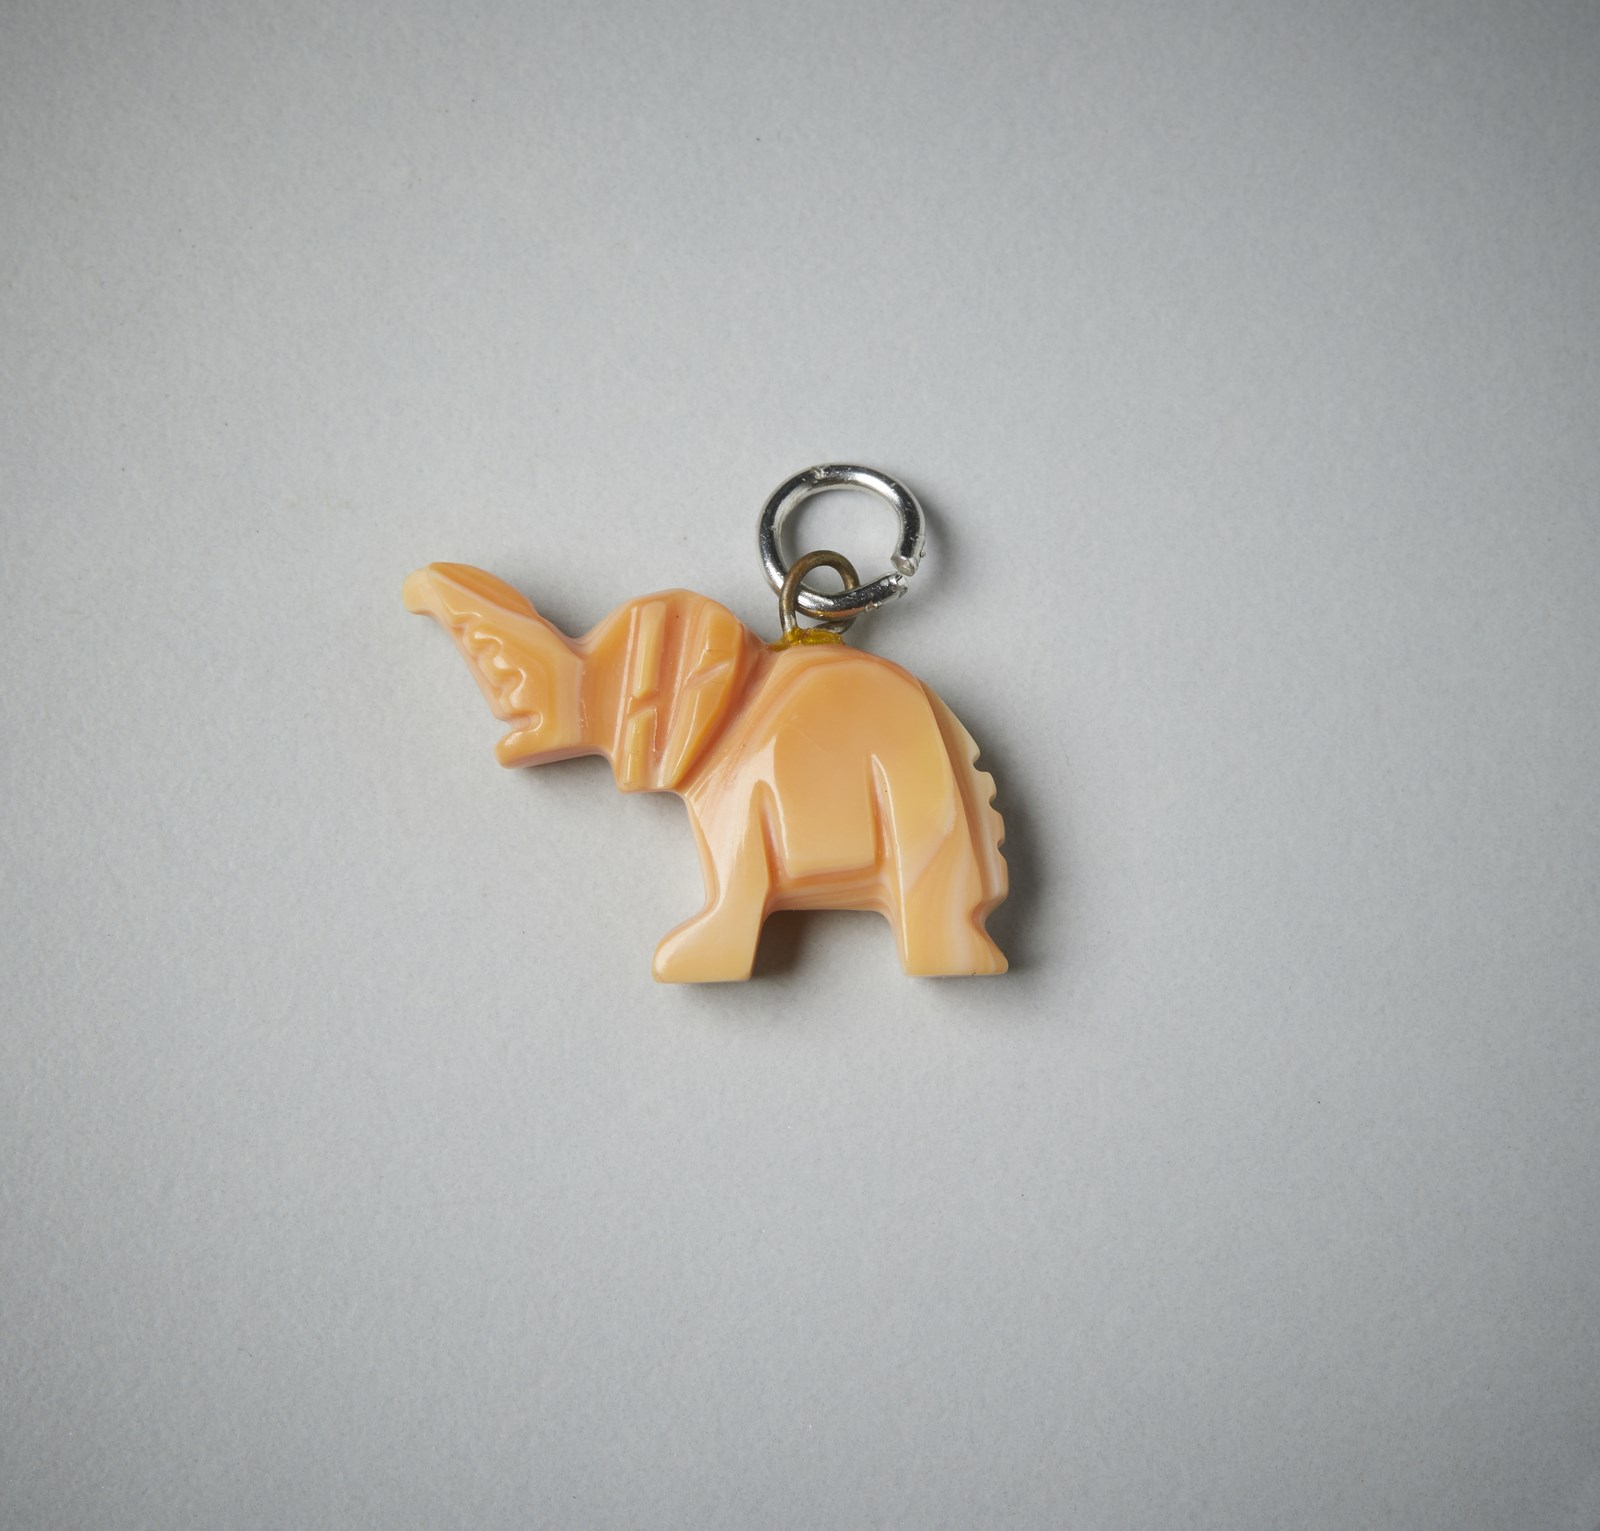 Coral pendant in the shape of an elephant. (. )